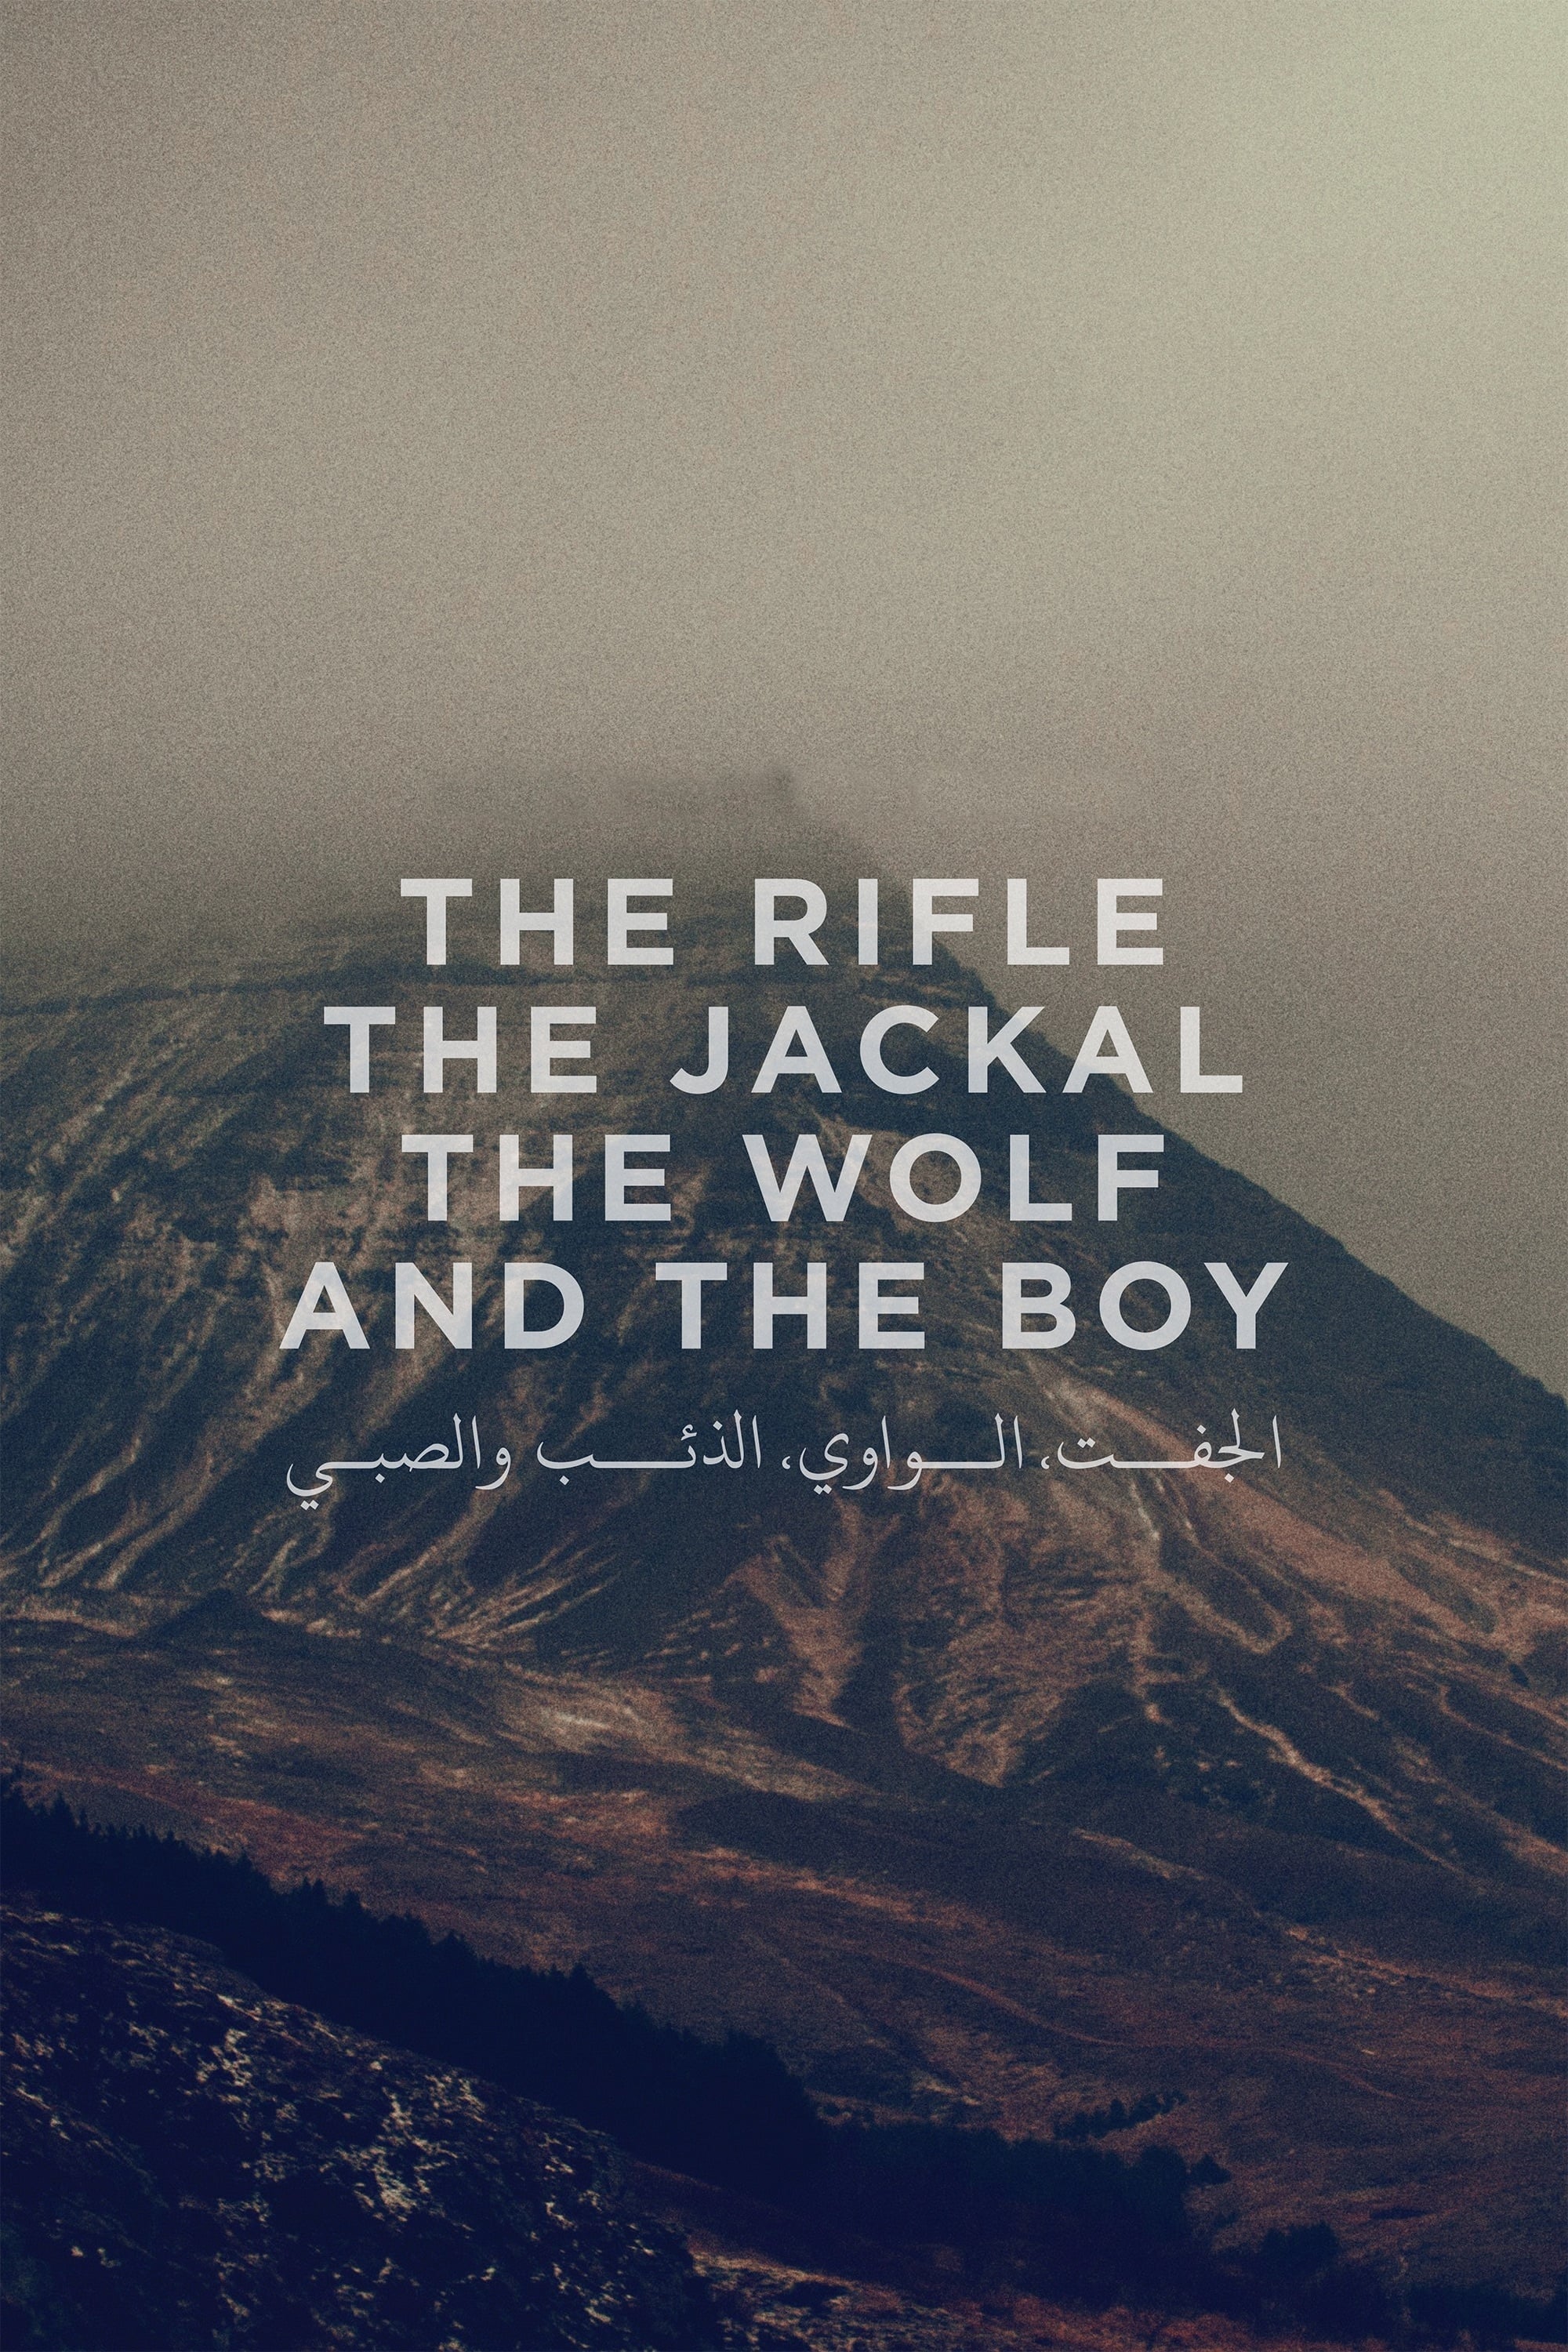 The Rifle, The Jackal, The Wolf and The Boy